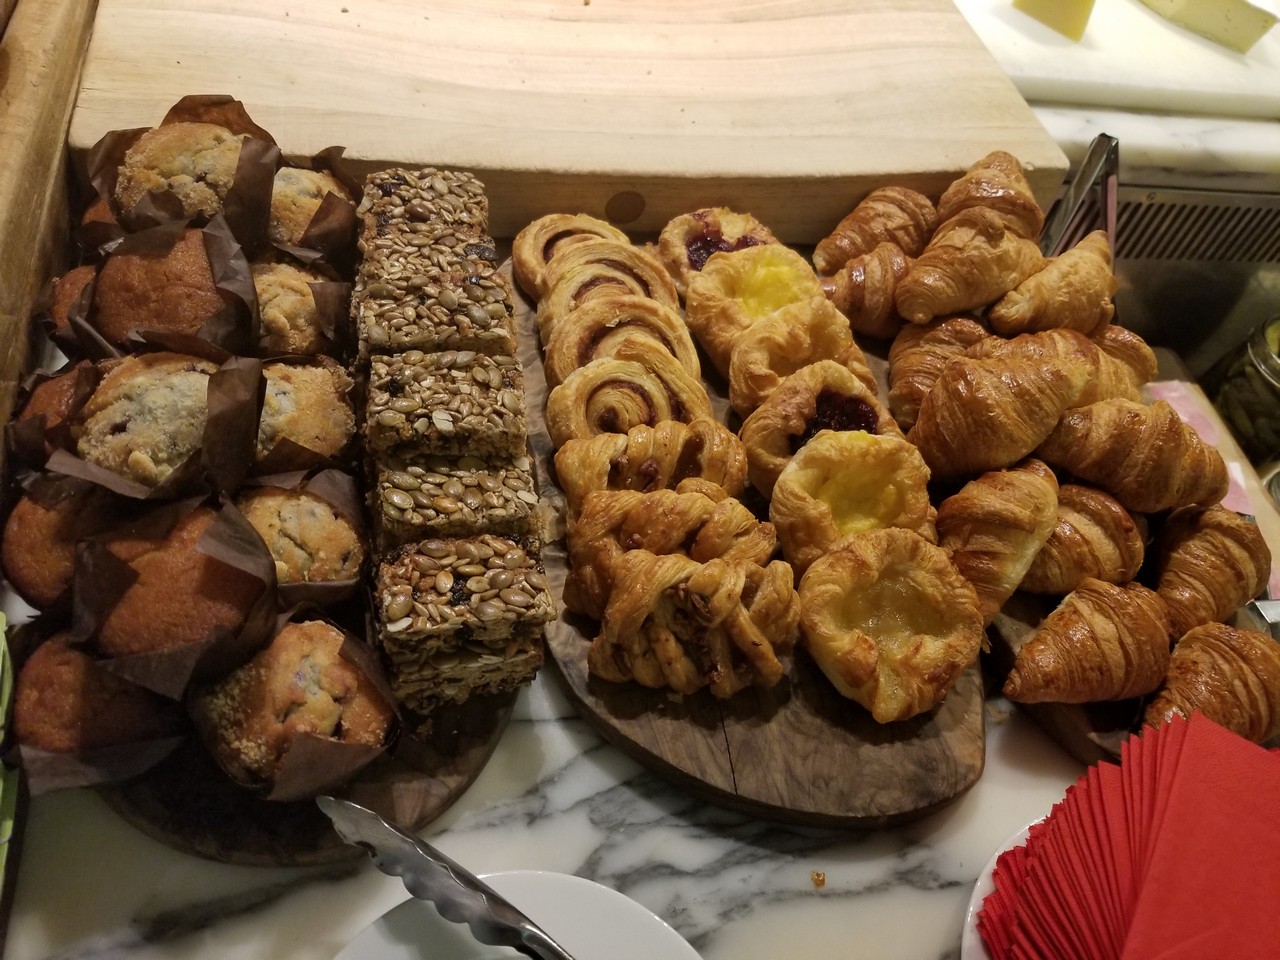 a table with different types of pastries